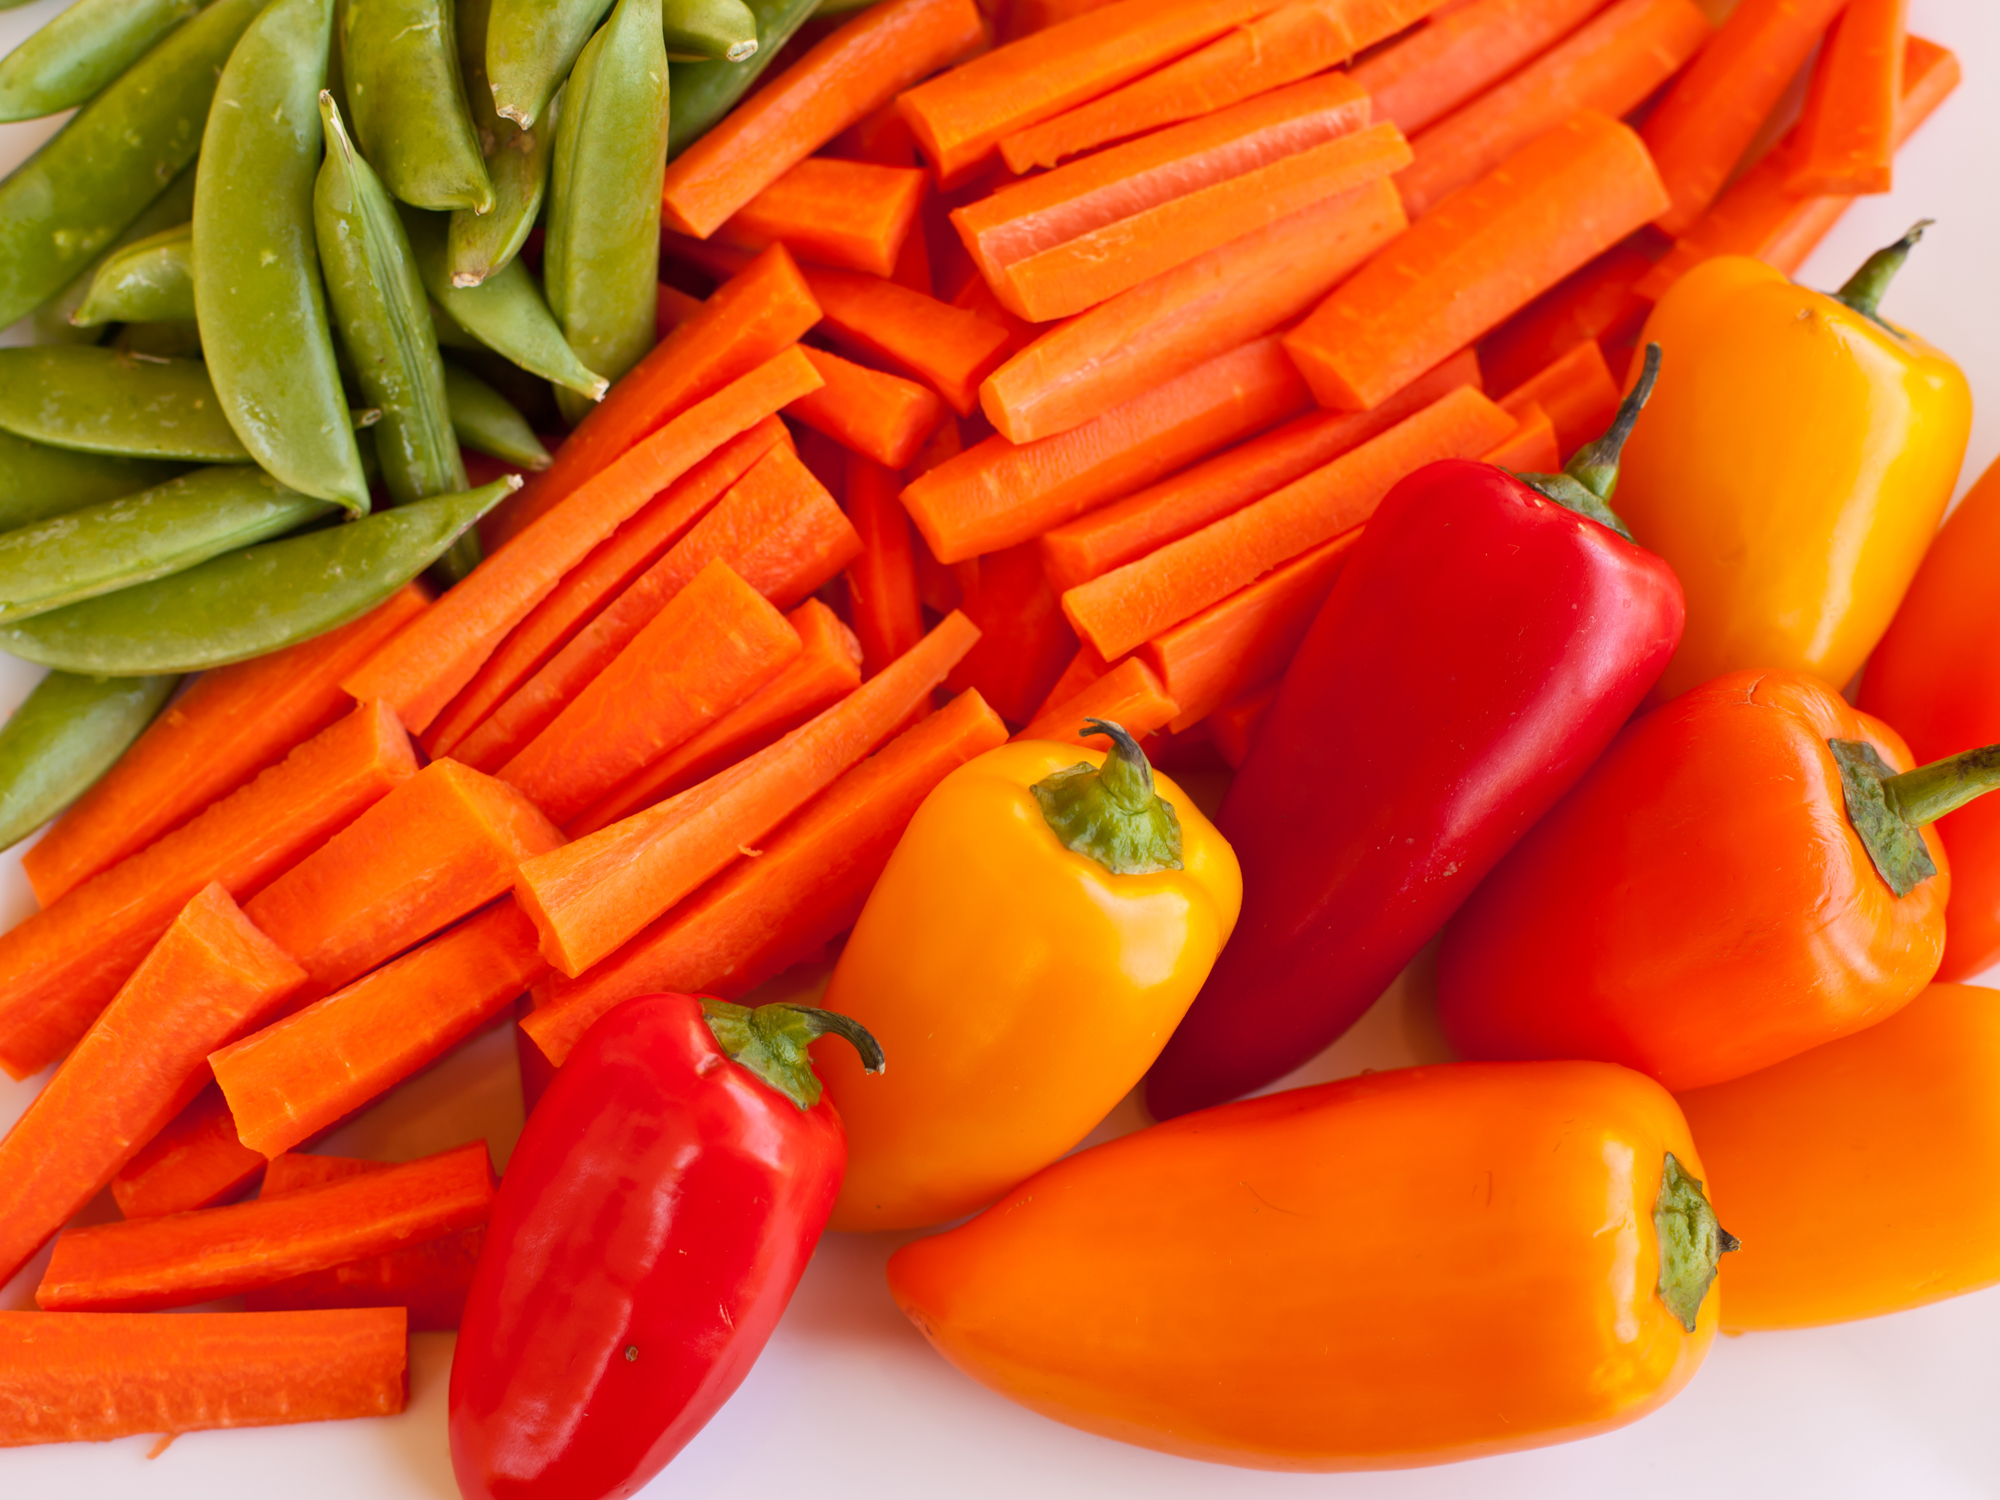 Triple your disease protection with carotenoids